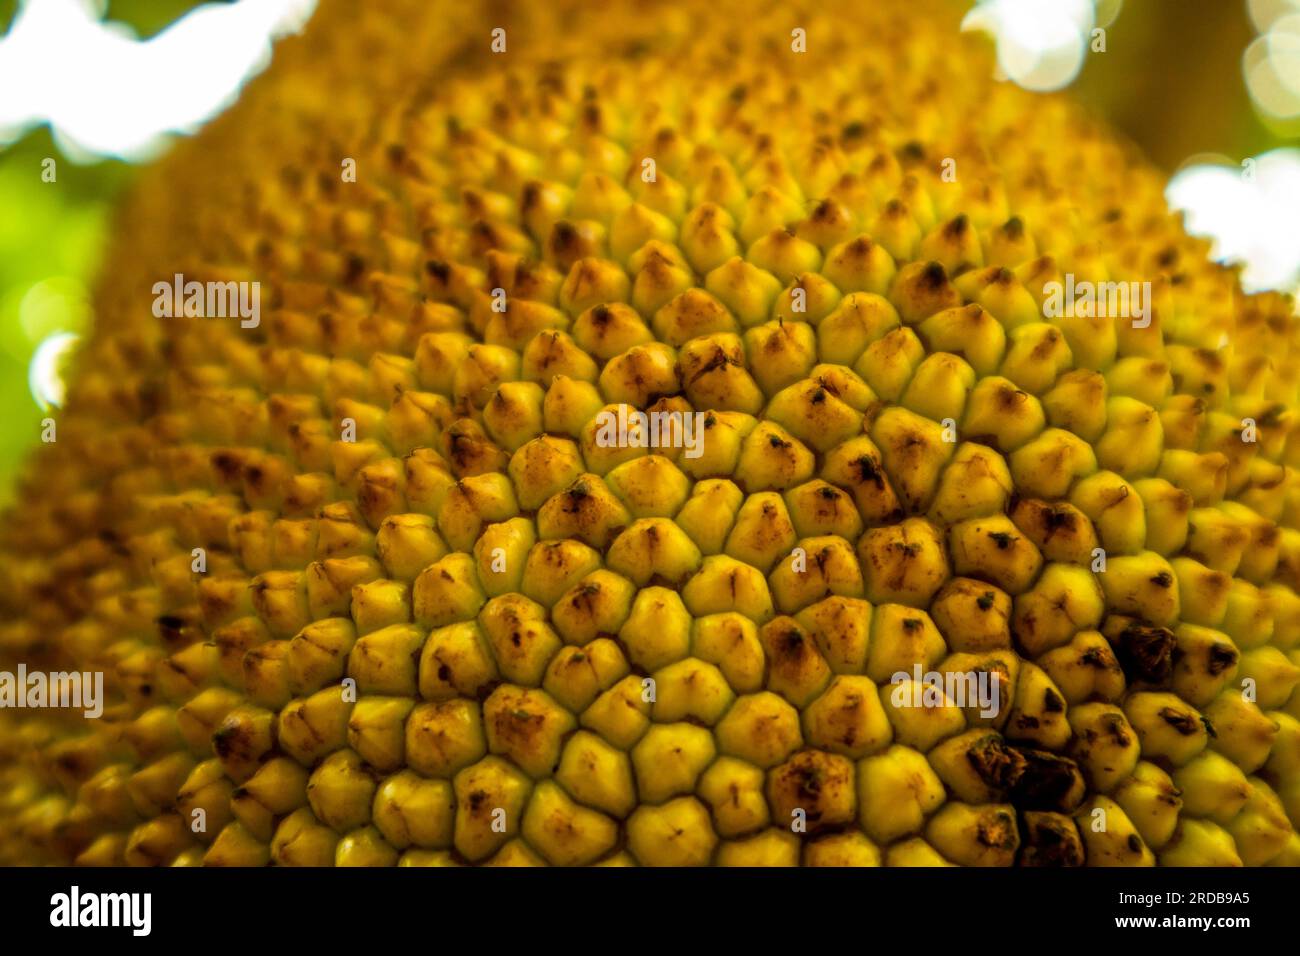 Jackfruit on the tree in the garden close up image Stock Photo